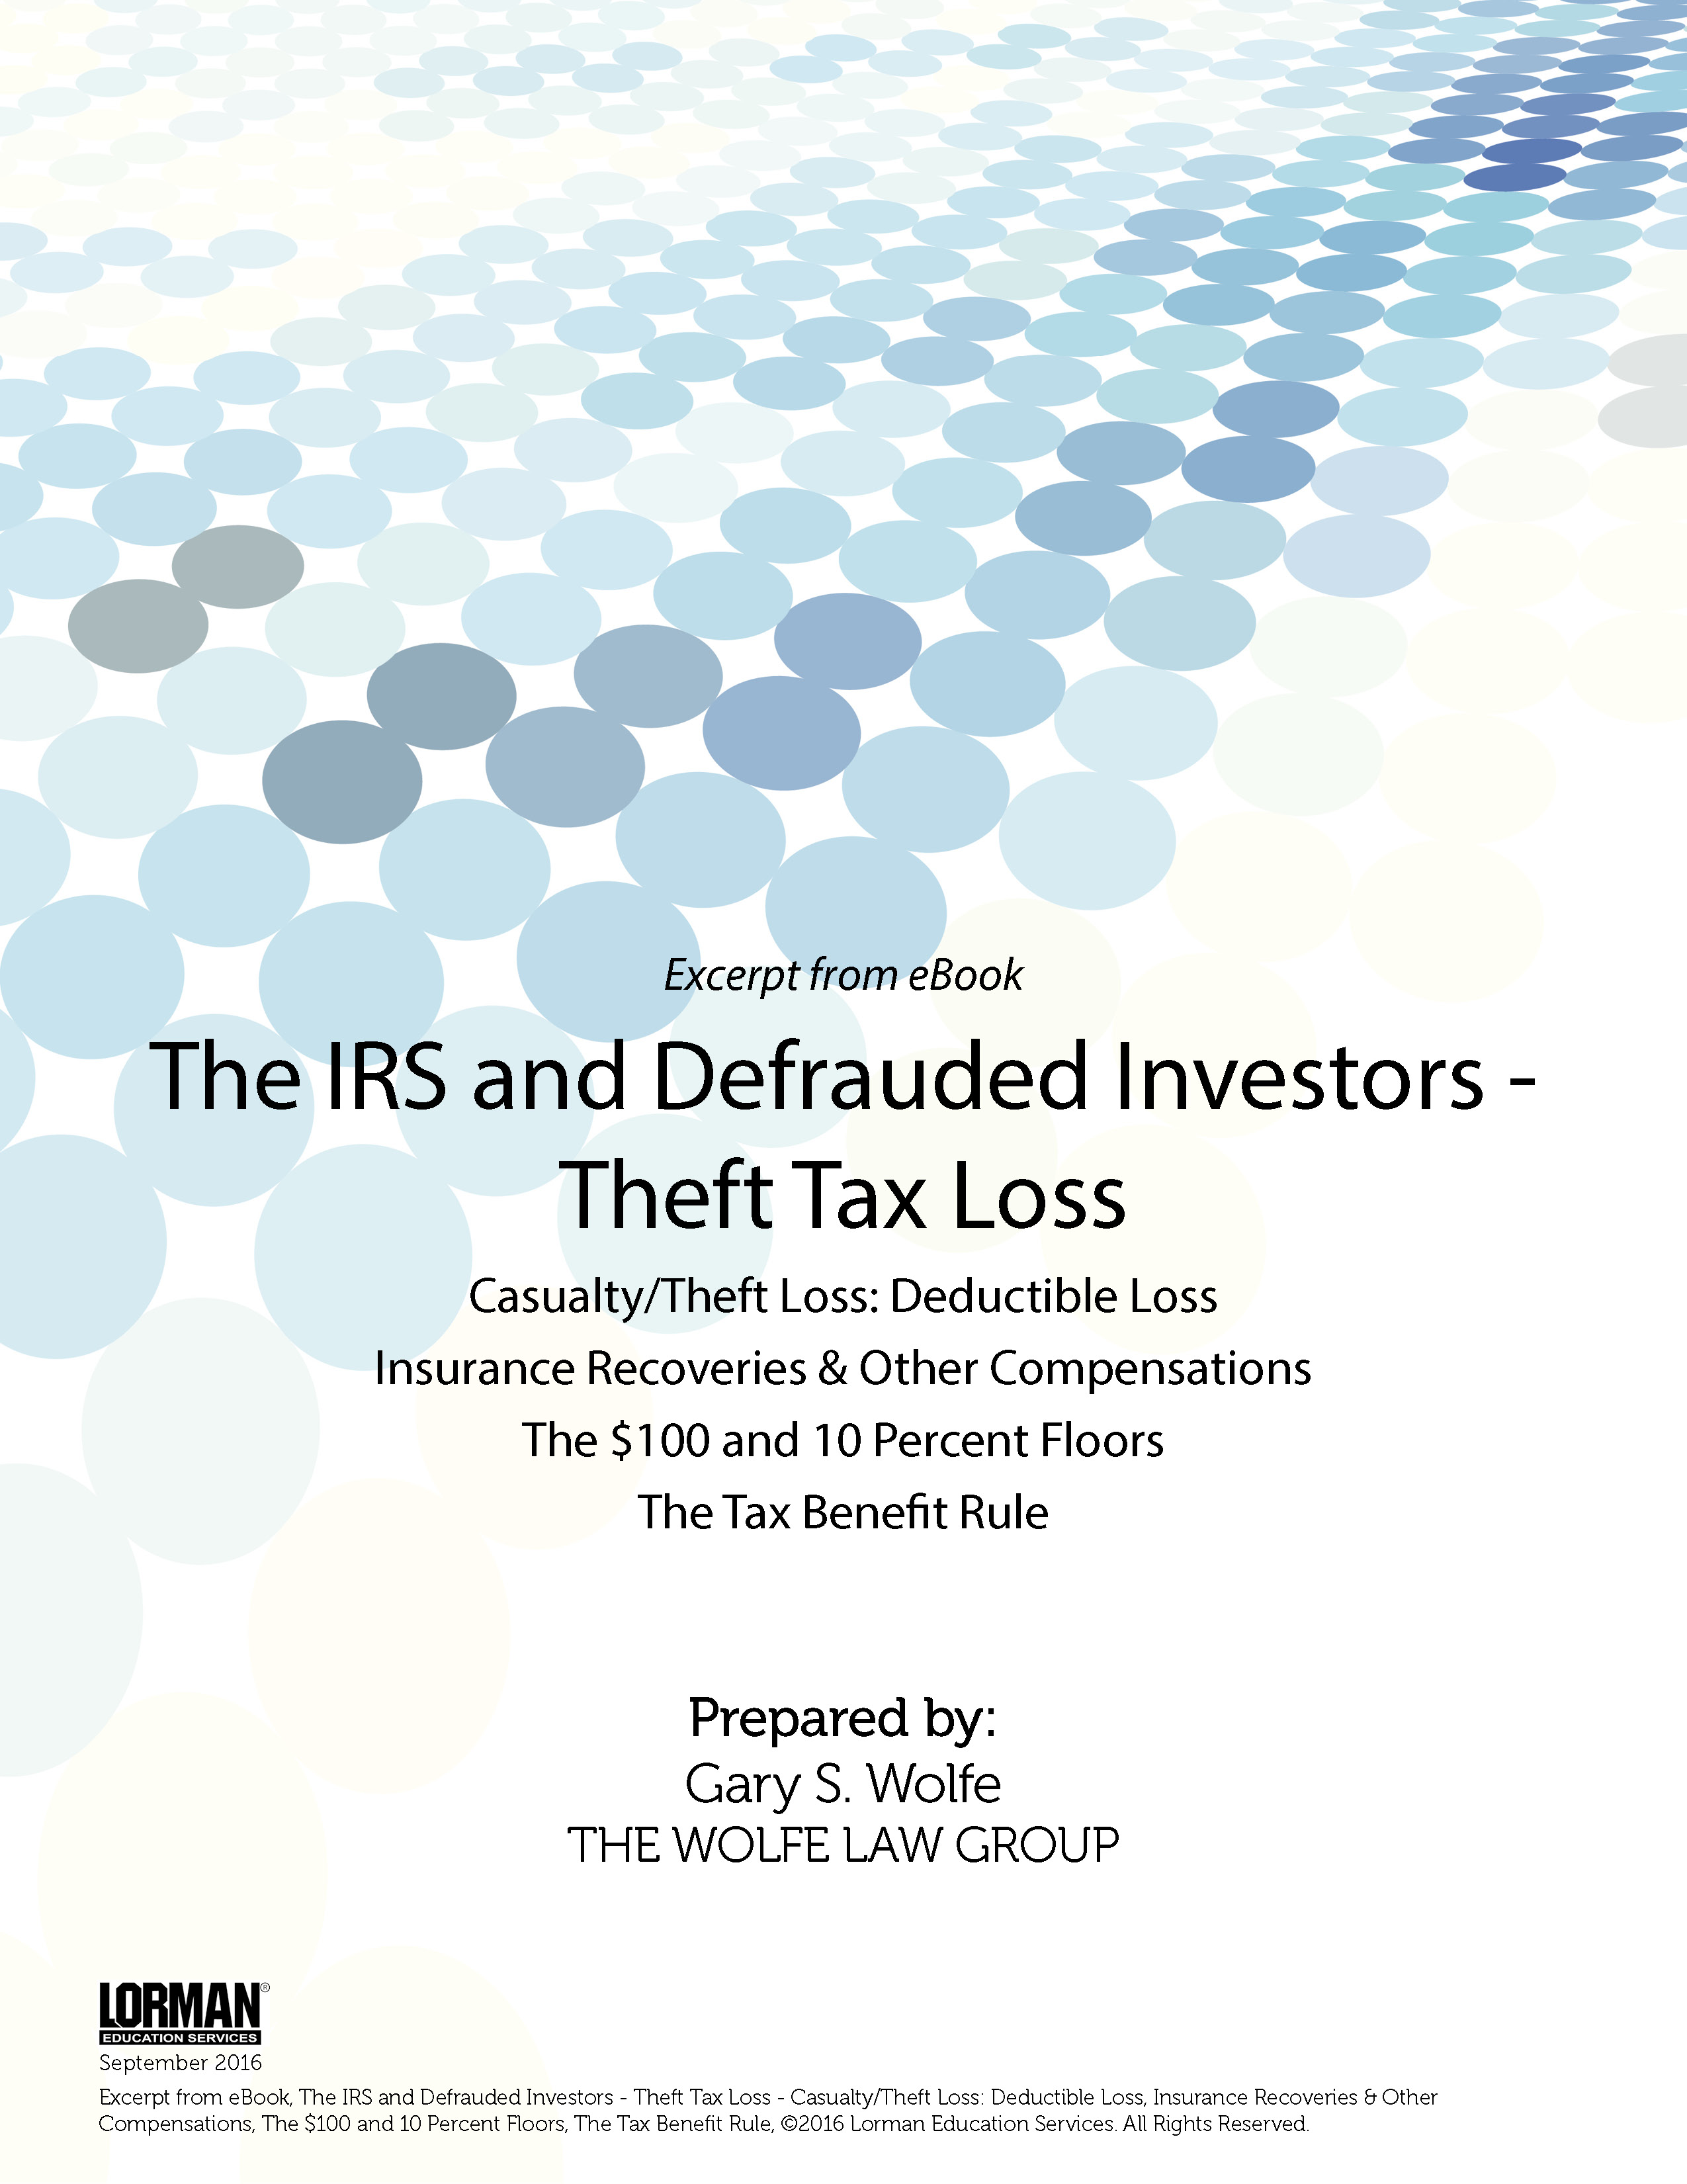 The IRS and Defrauded Investors: Theft Tax Loss